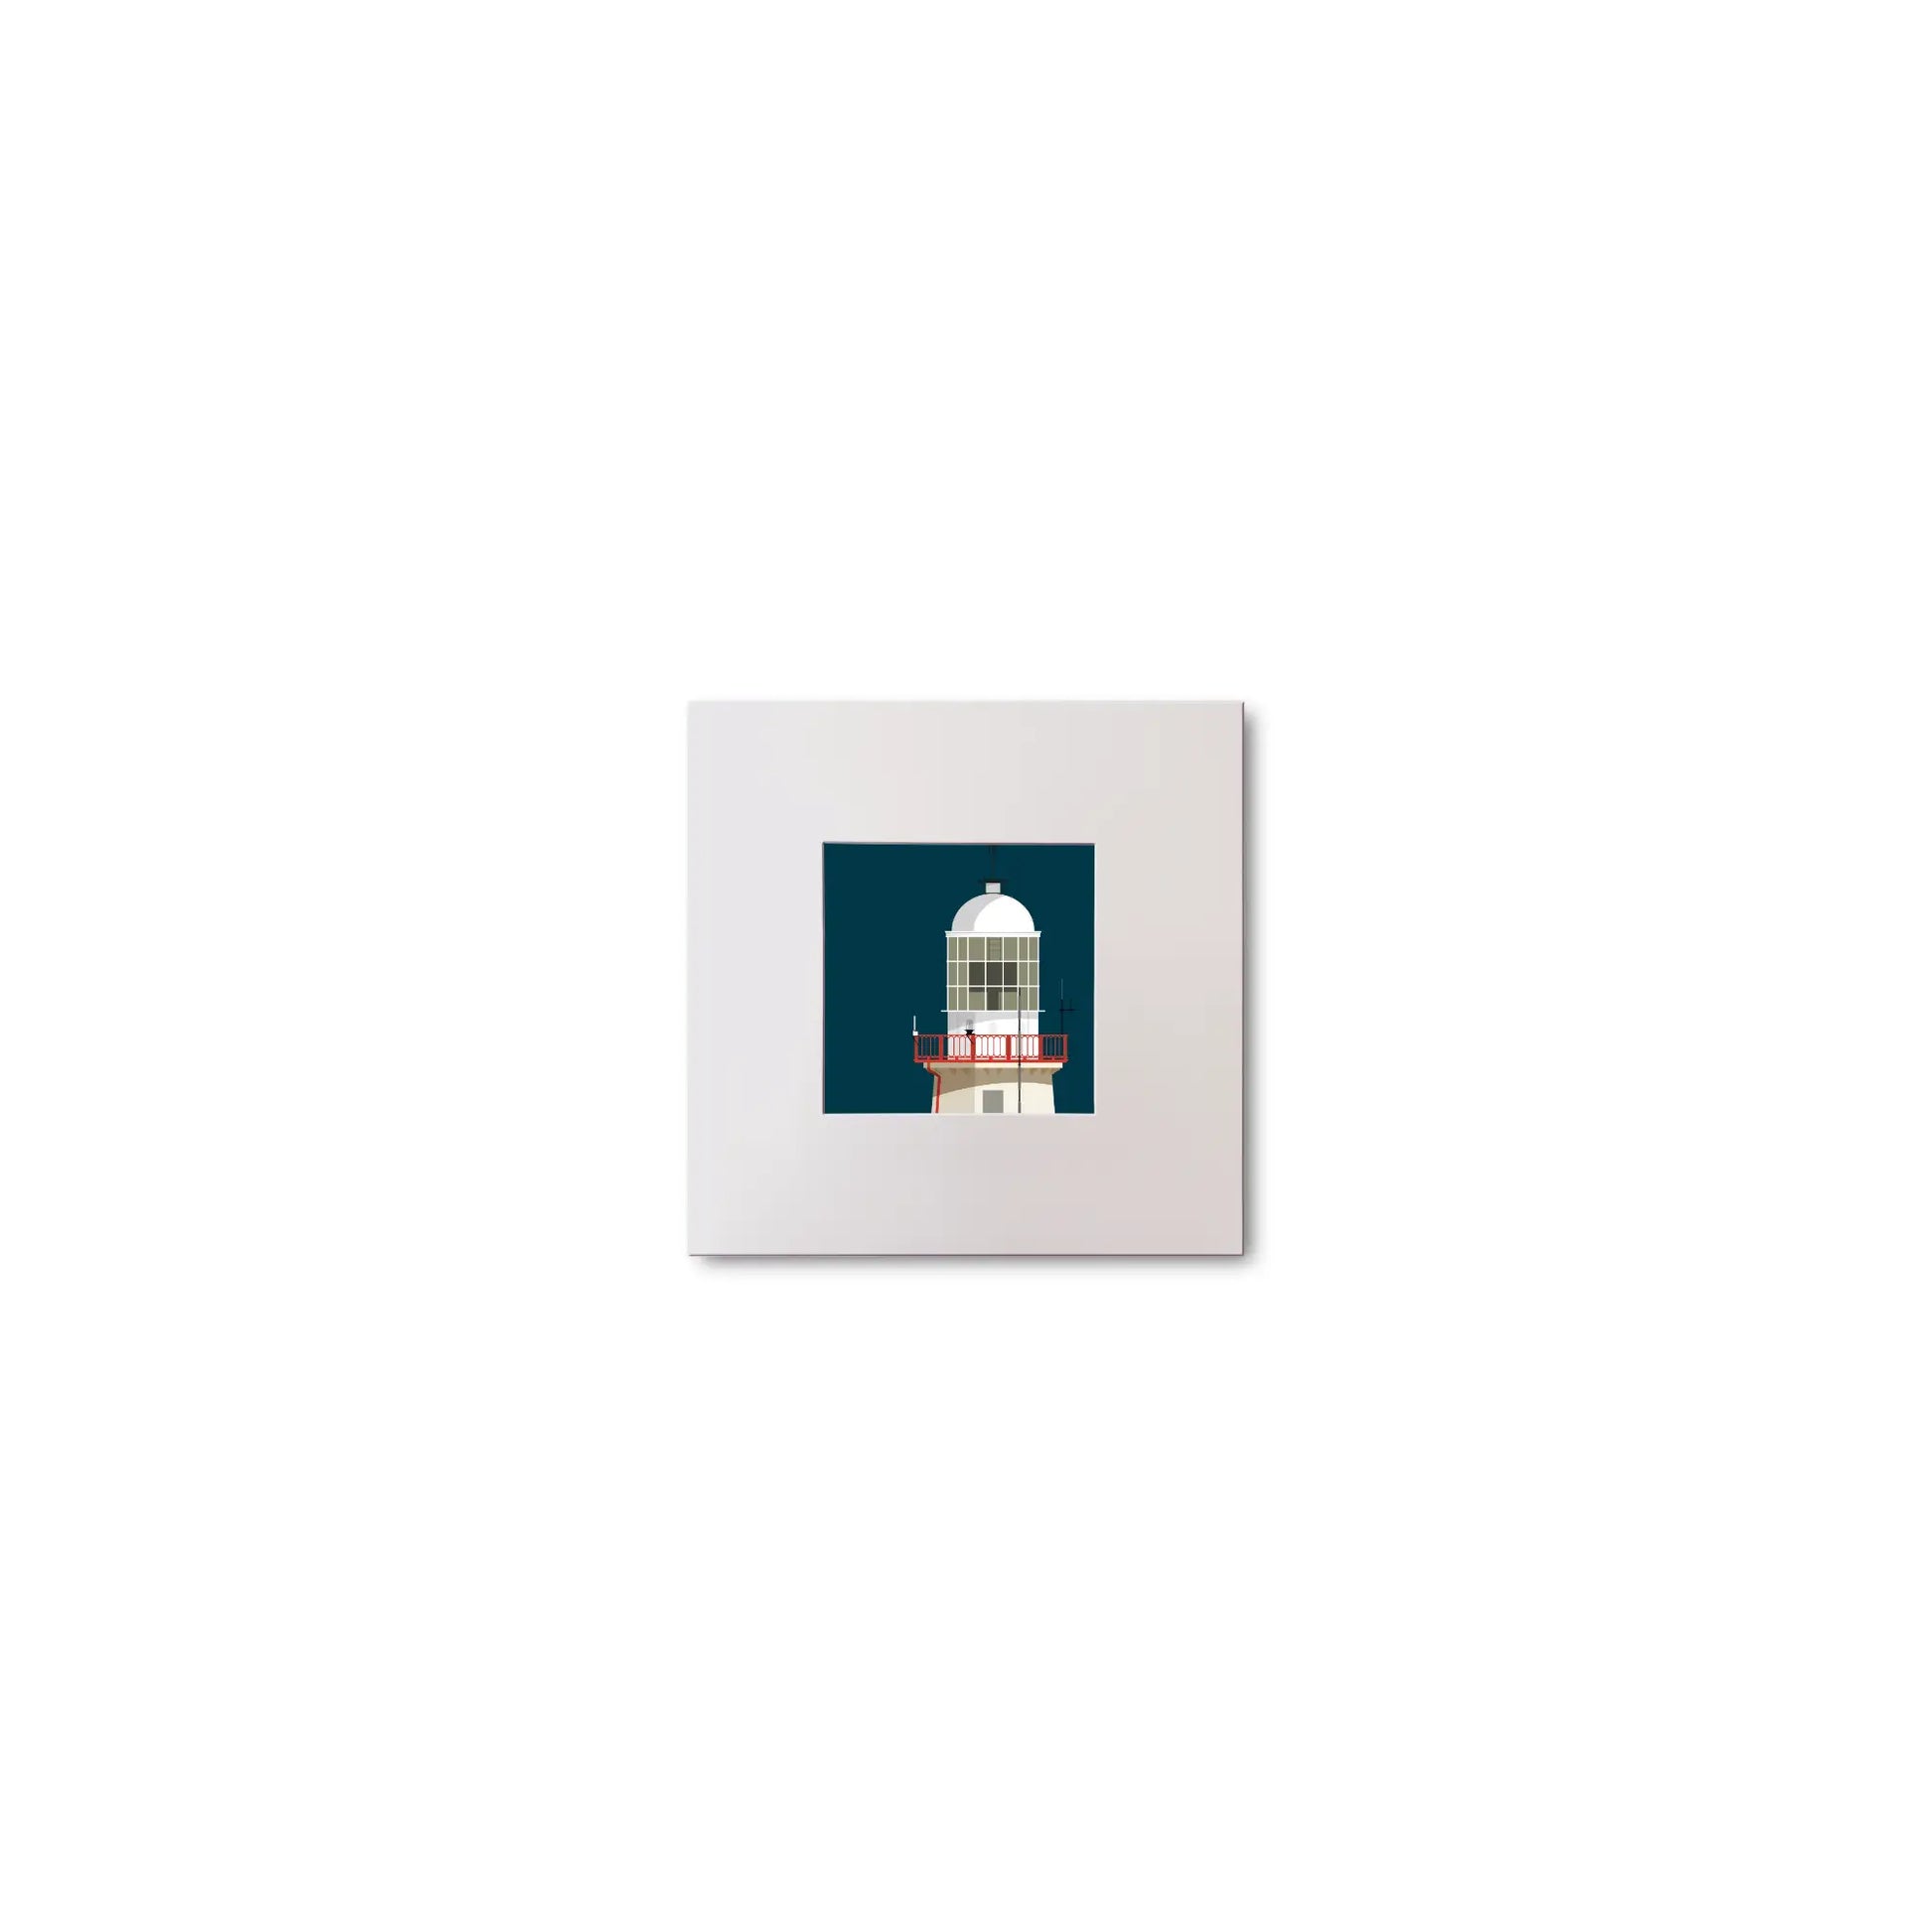 Illustration of The Baily lighthouse on a midnight blue background, mounted and measuring 10x10cm.